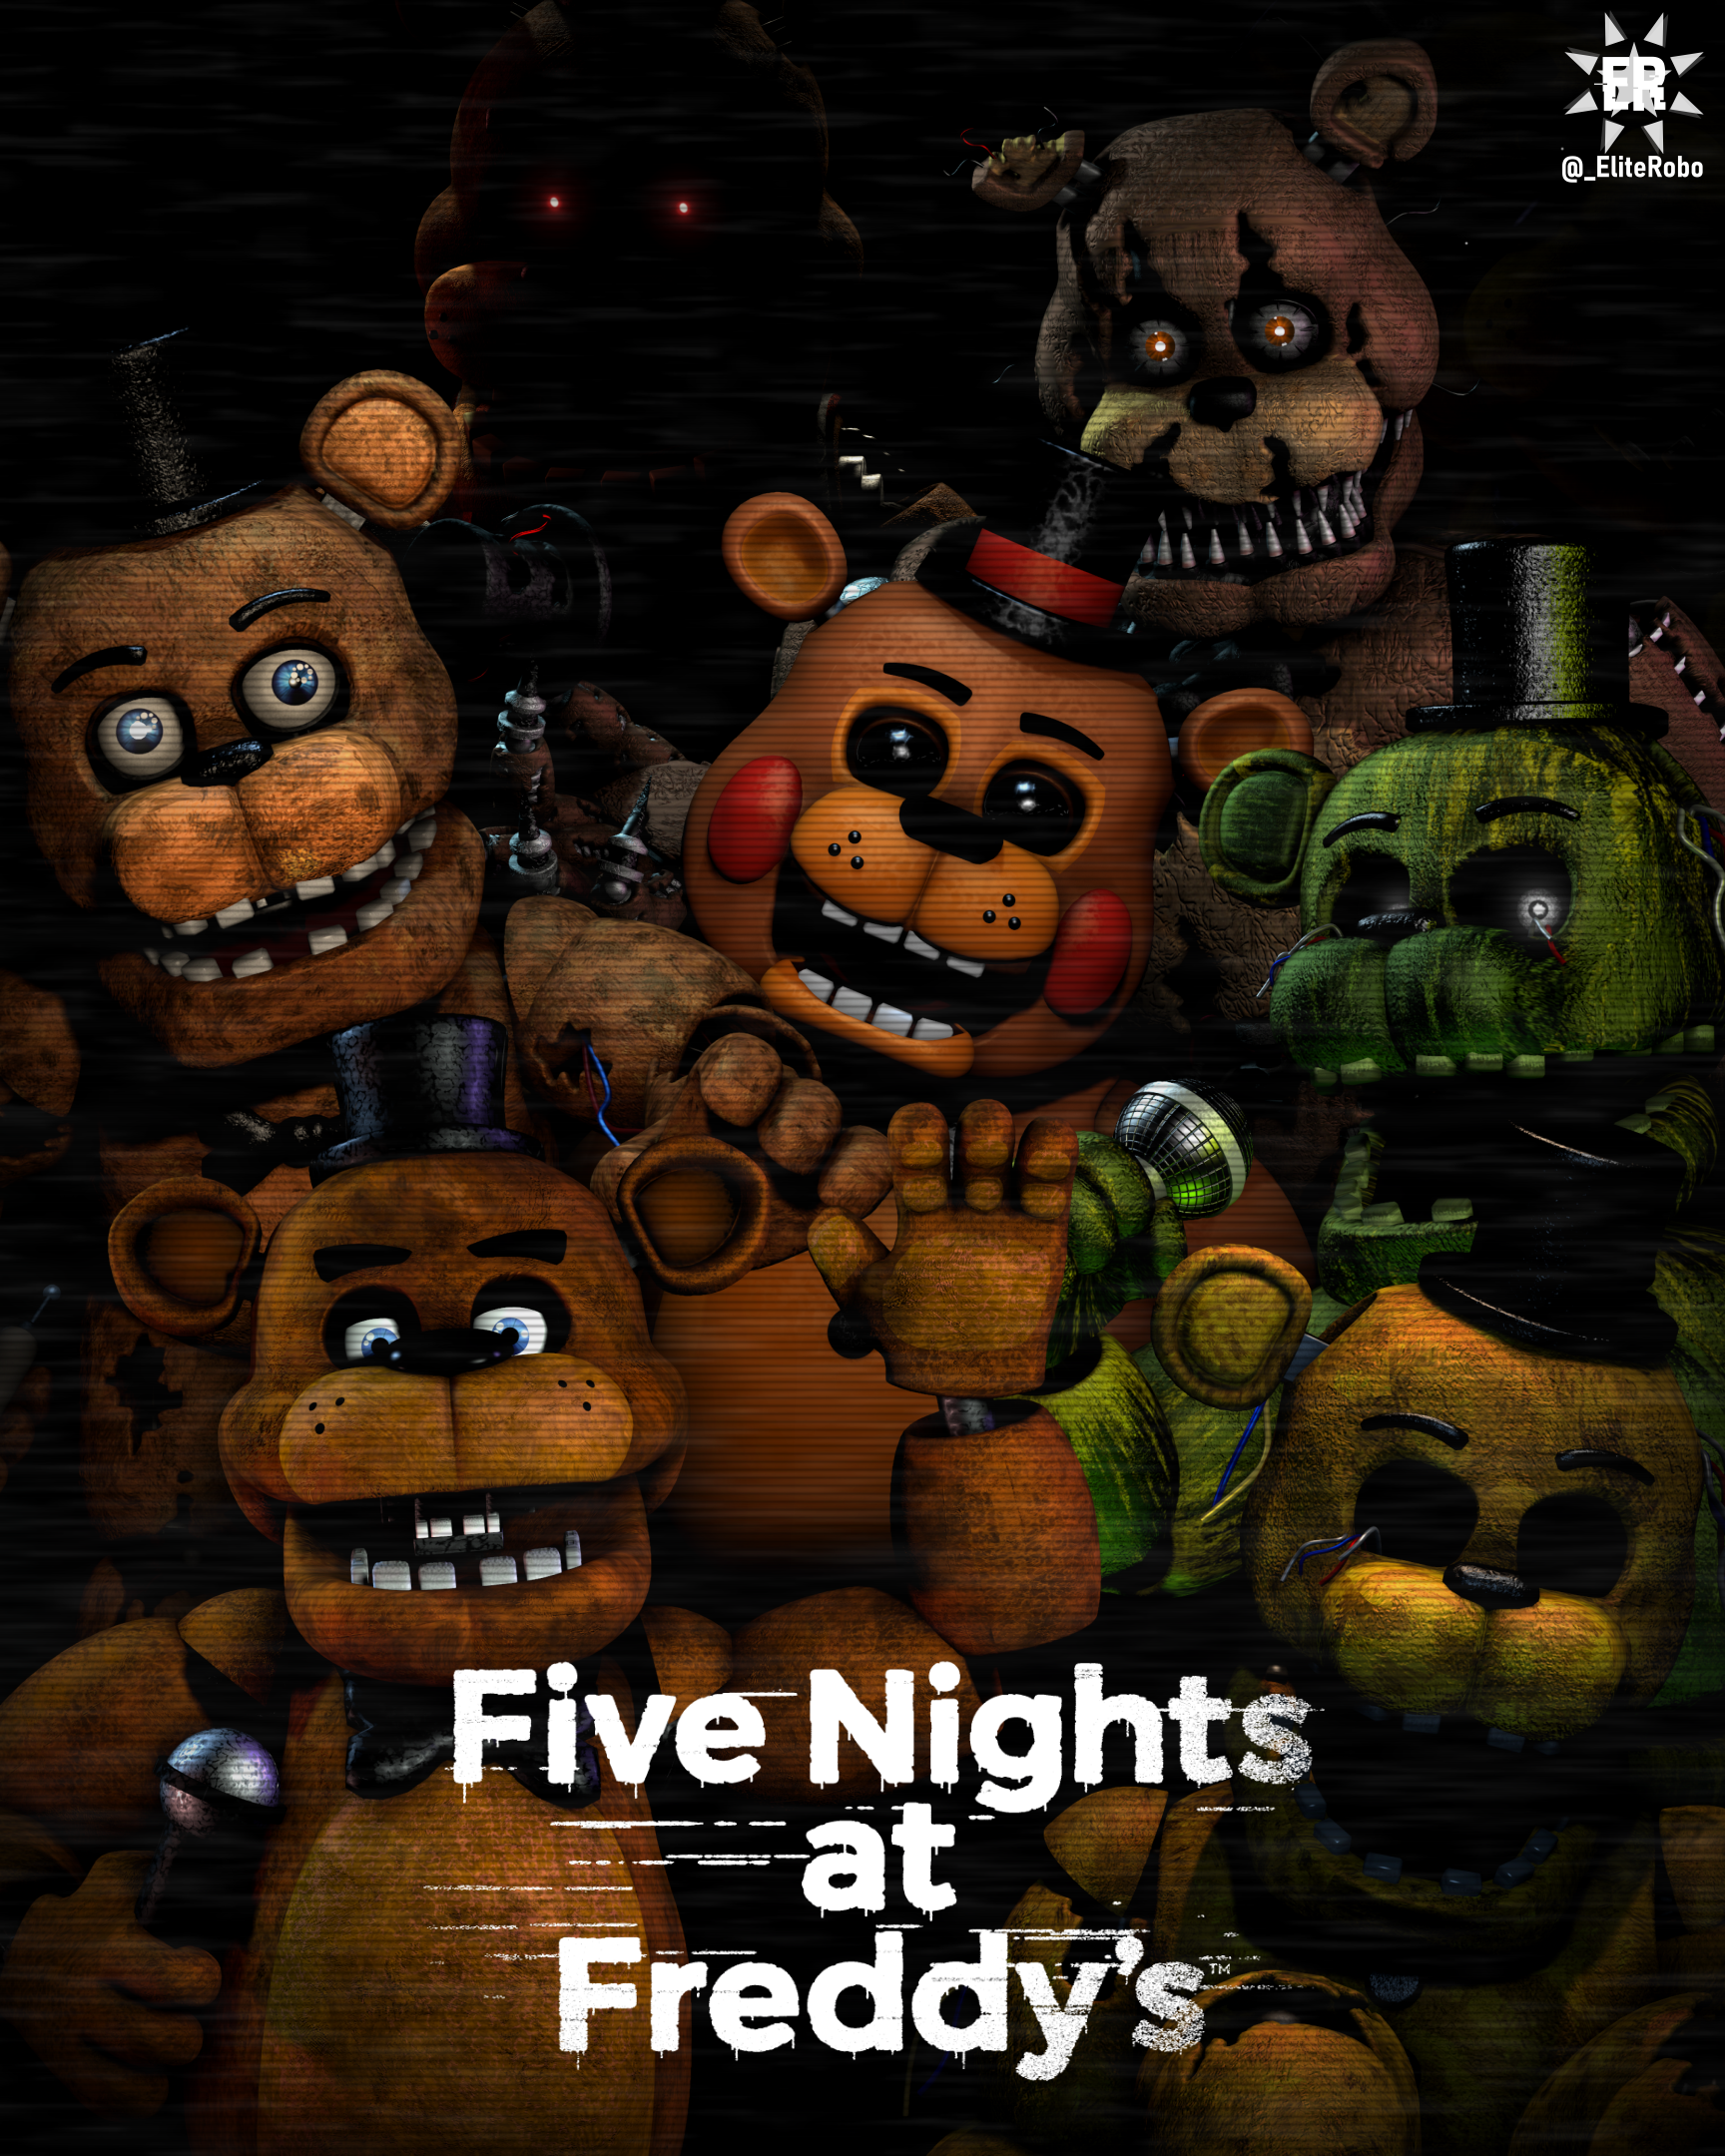 Nightmare Fnaf 4 Seven Years Anniversary/ inspired by a fanart